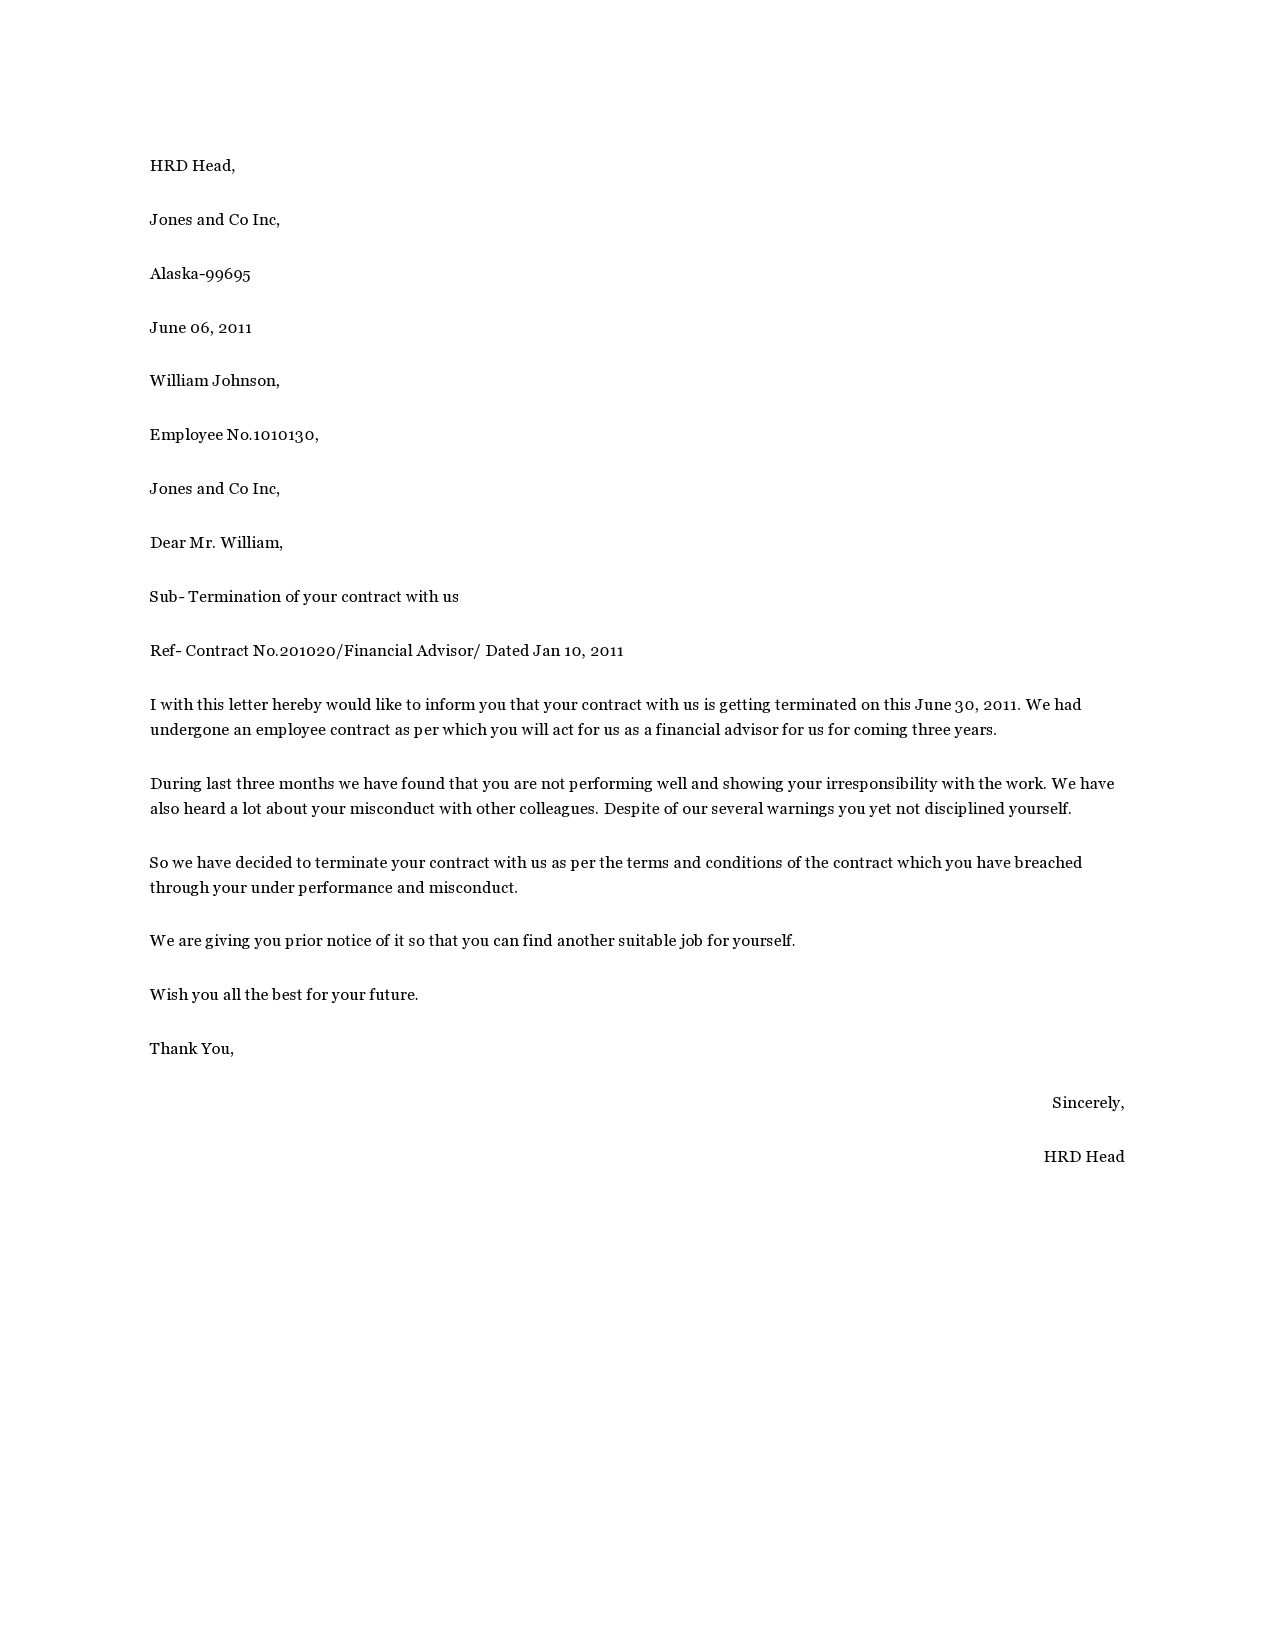 Free contract termination letter 50